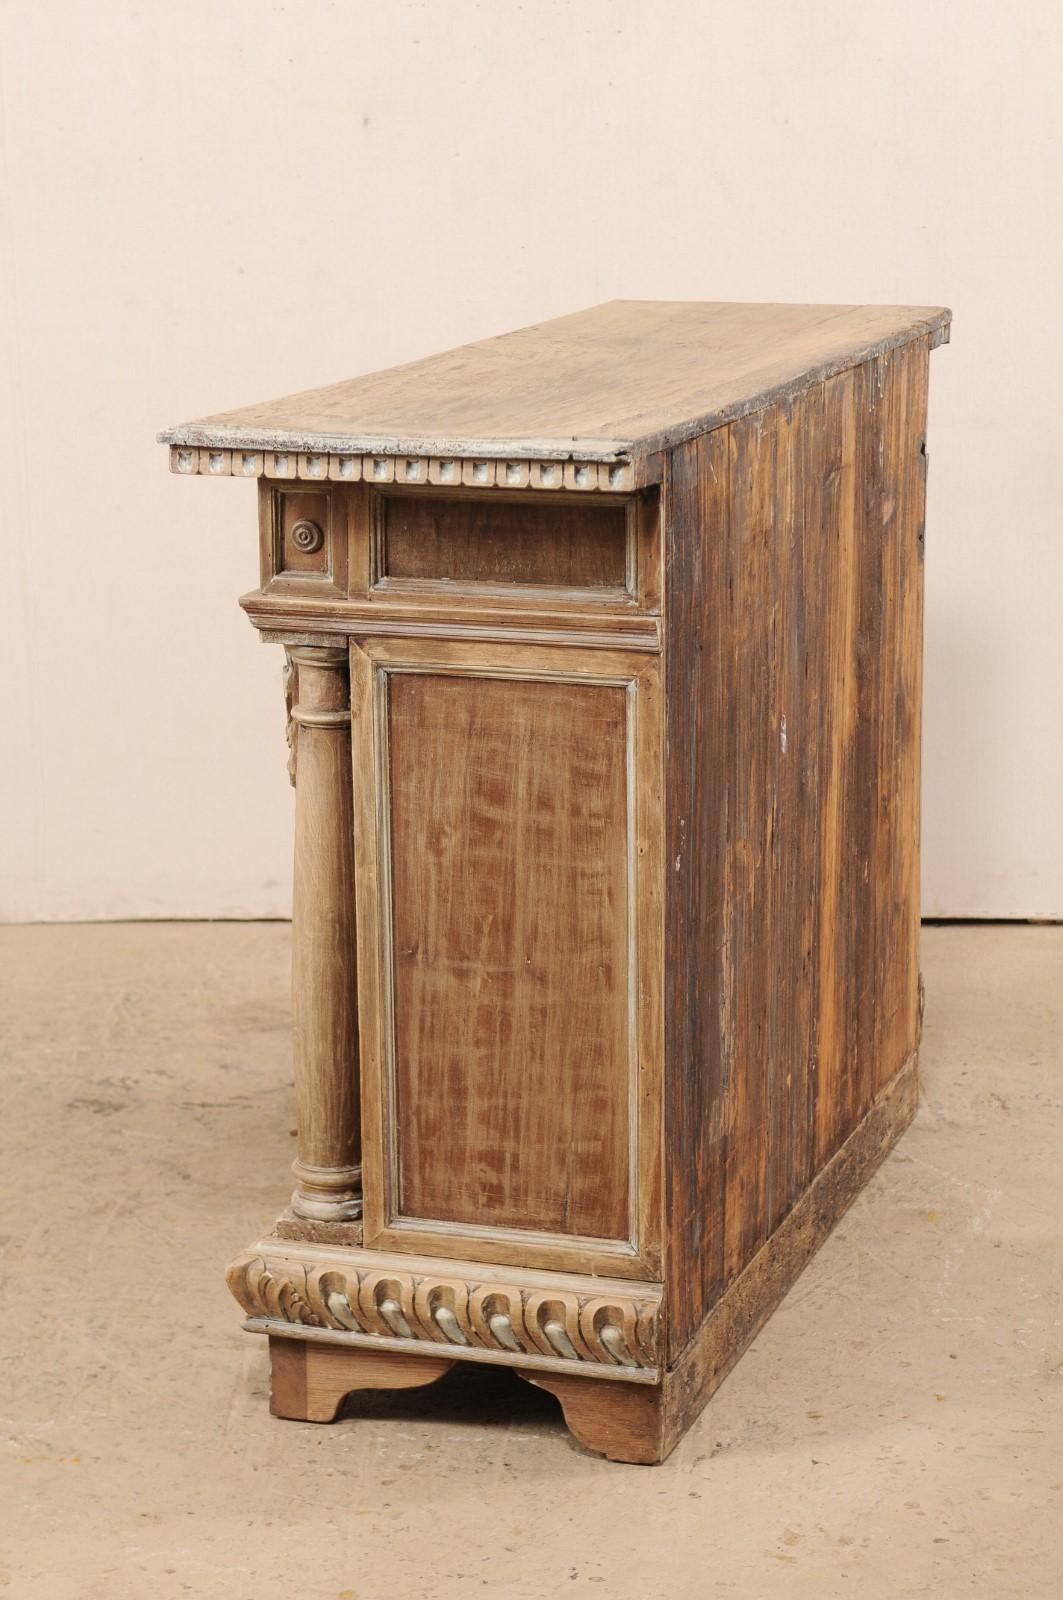 Italian Elaborately-Carved Wood Buffet Console Cabinet, Late 19th Century For Sale 5